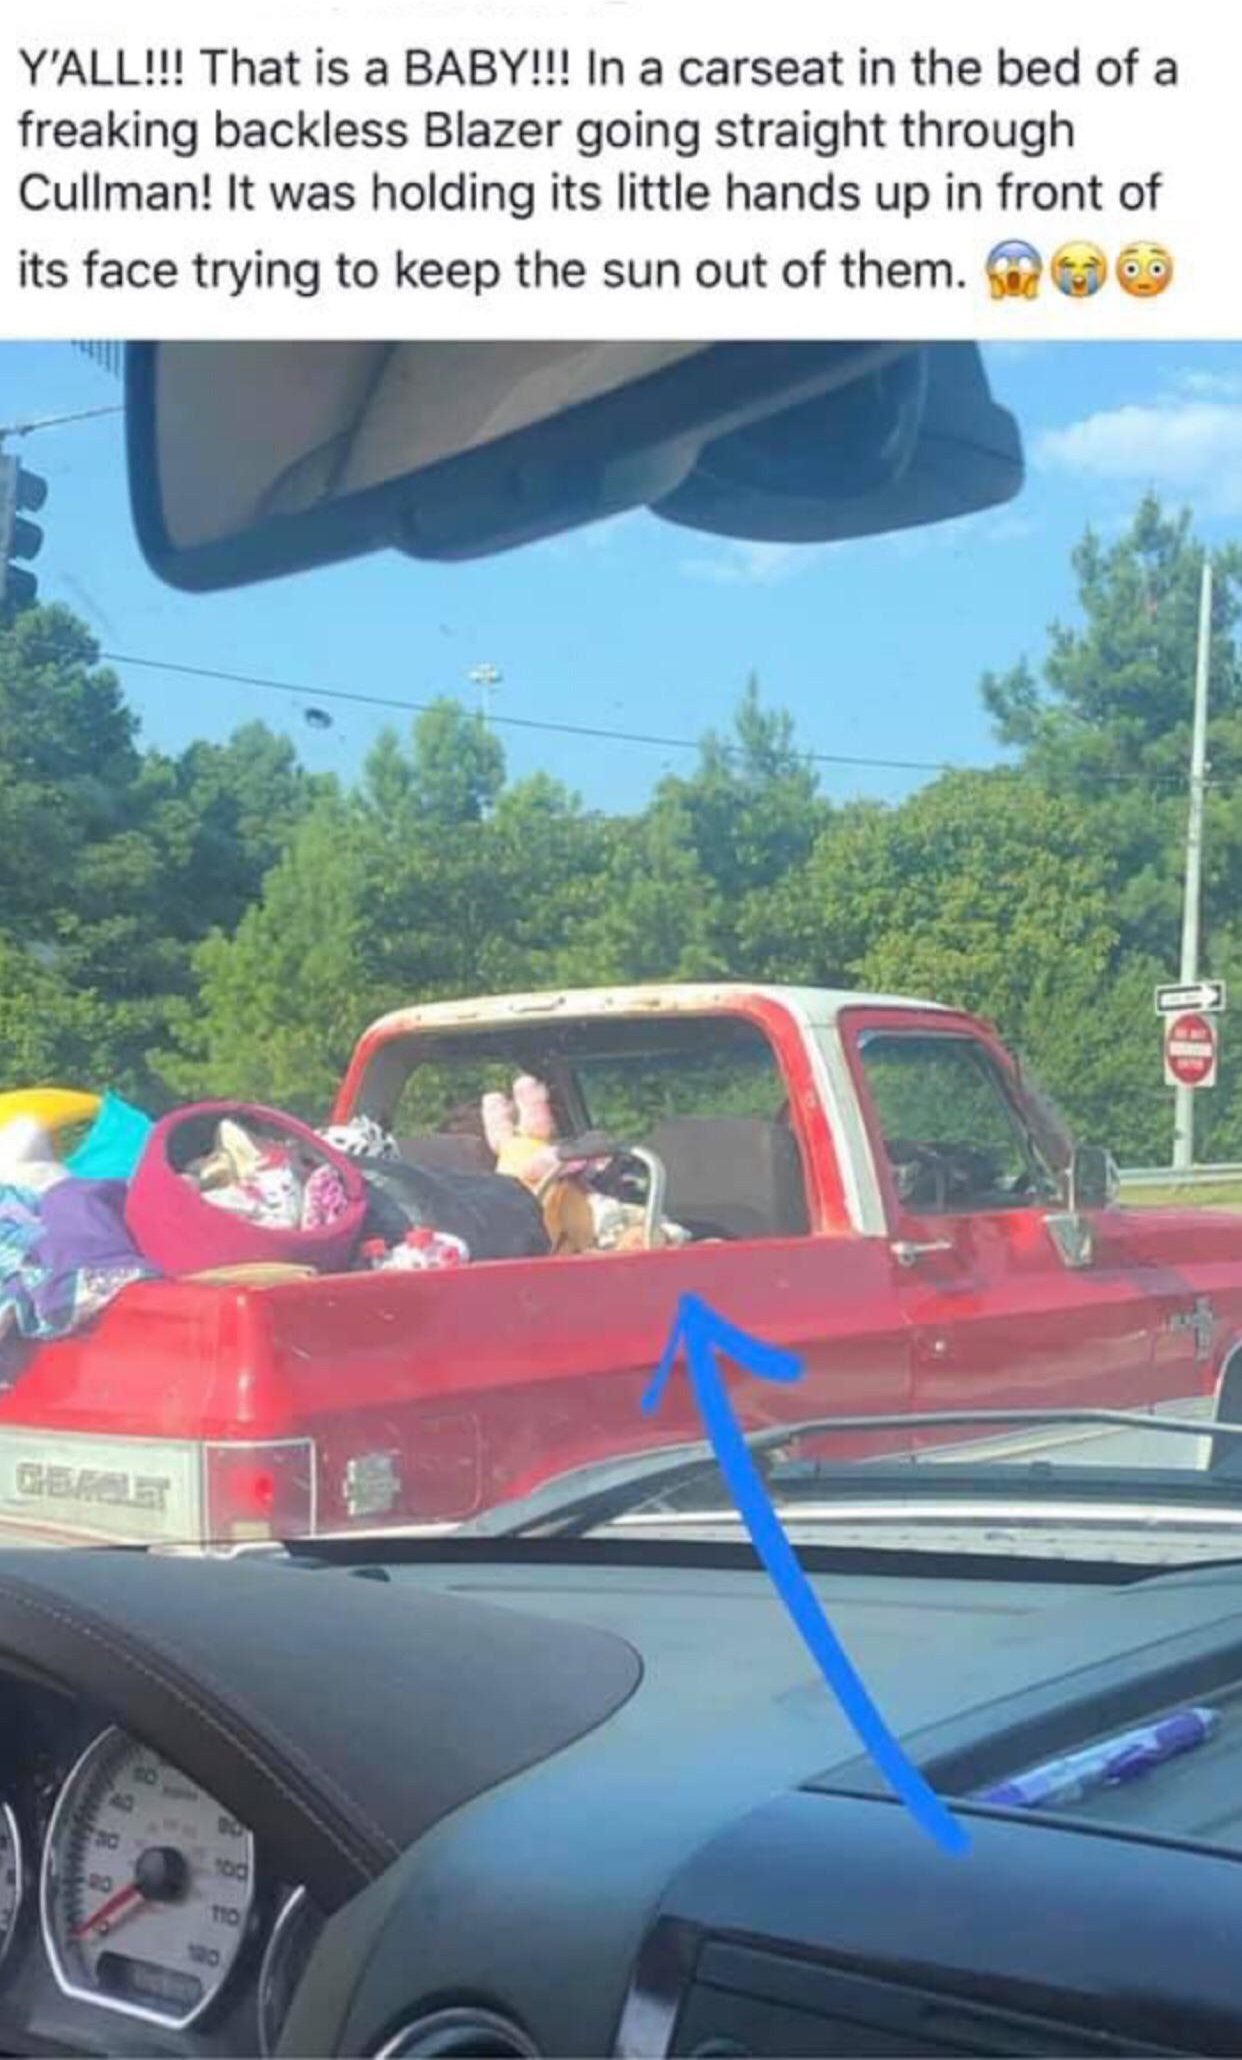 windshield - Y'All!!! That is a Baby!!! In a carseat in the bed of a freaking backless Blazer going straight through Cullman! It was holding its little hands up in front of its face trying to keep the sun out of them. Ge